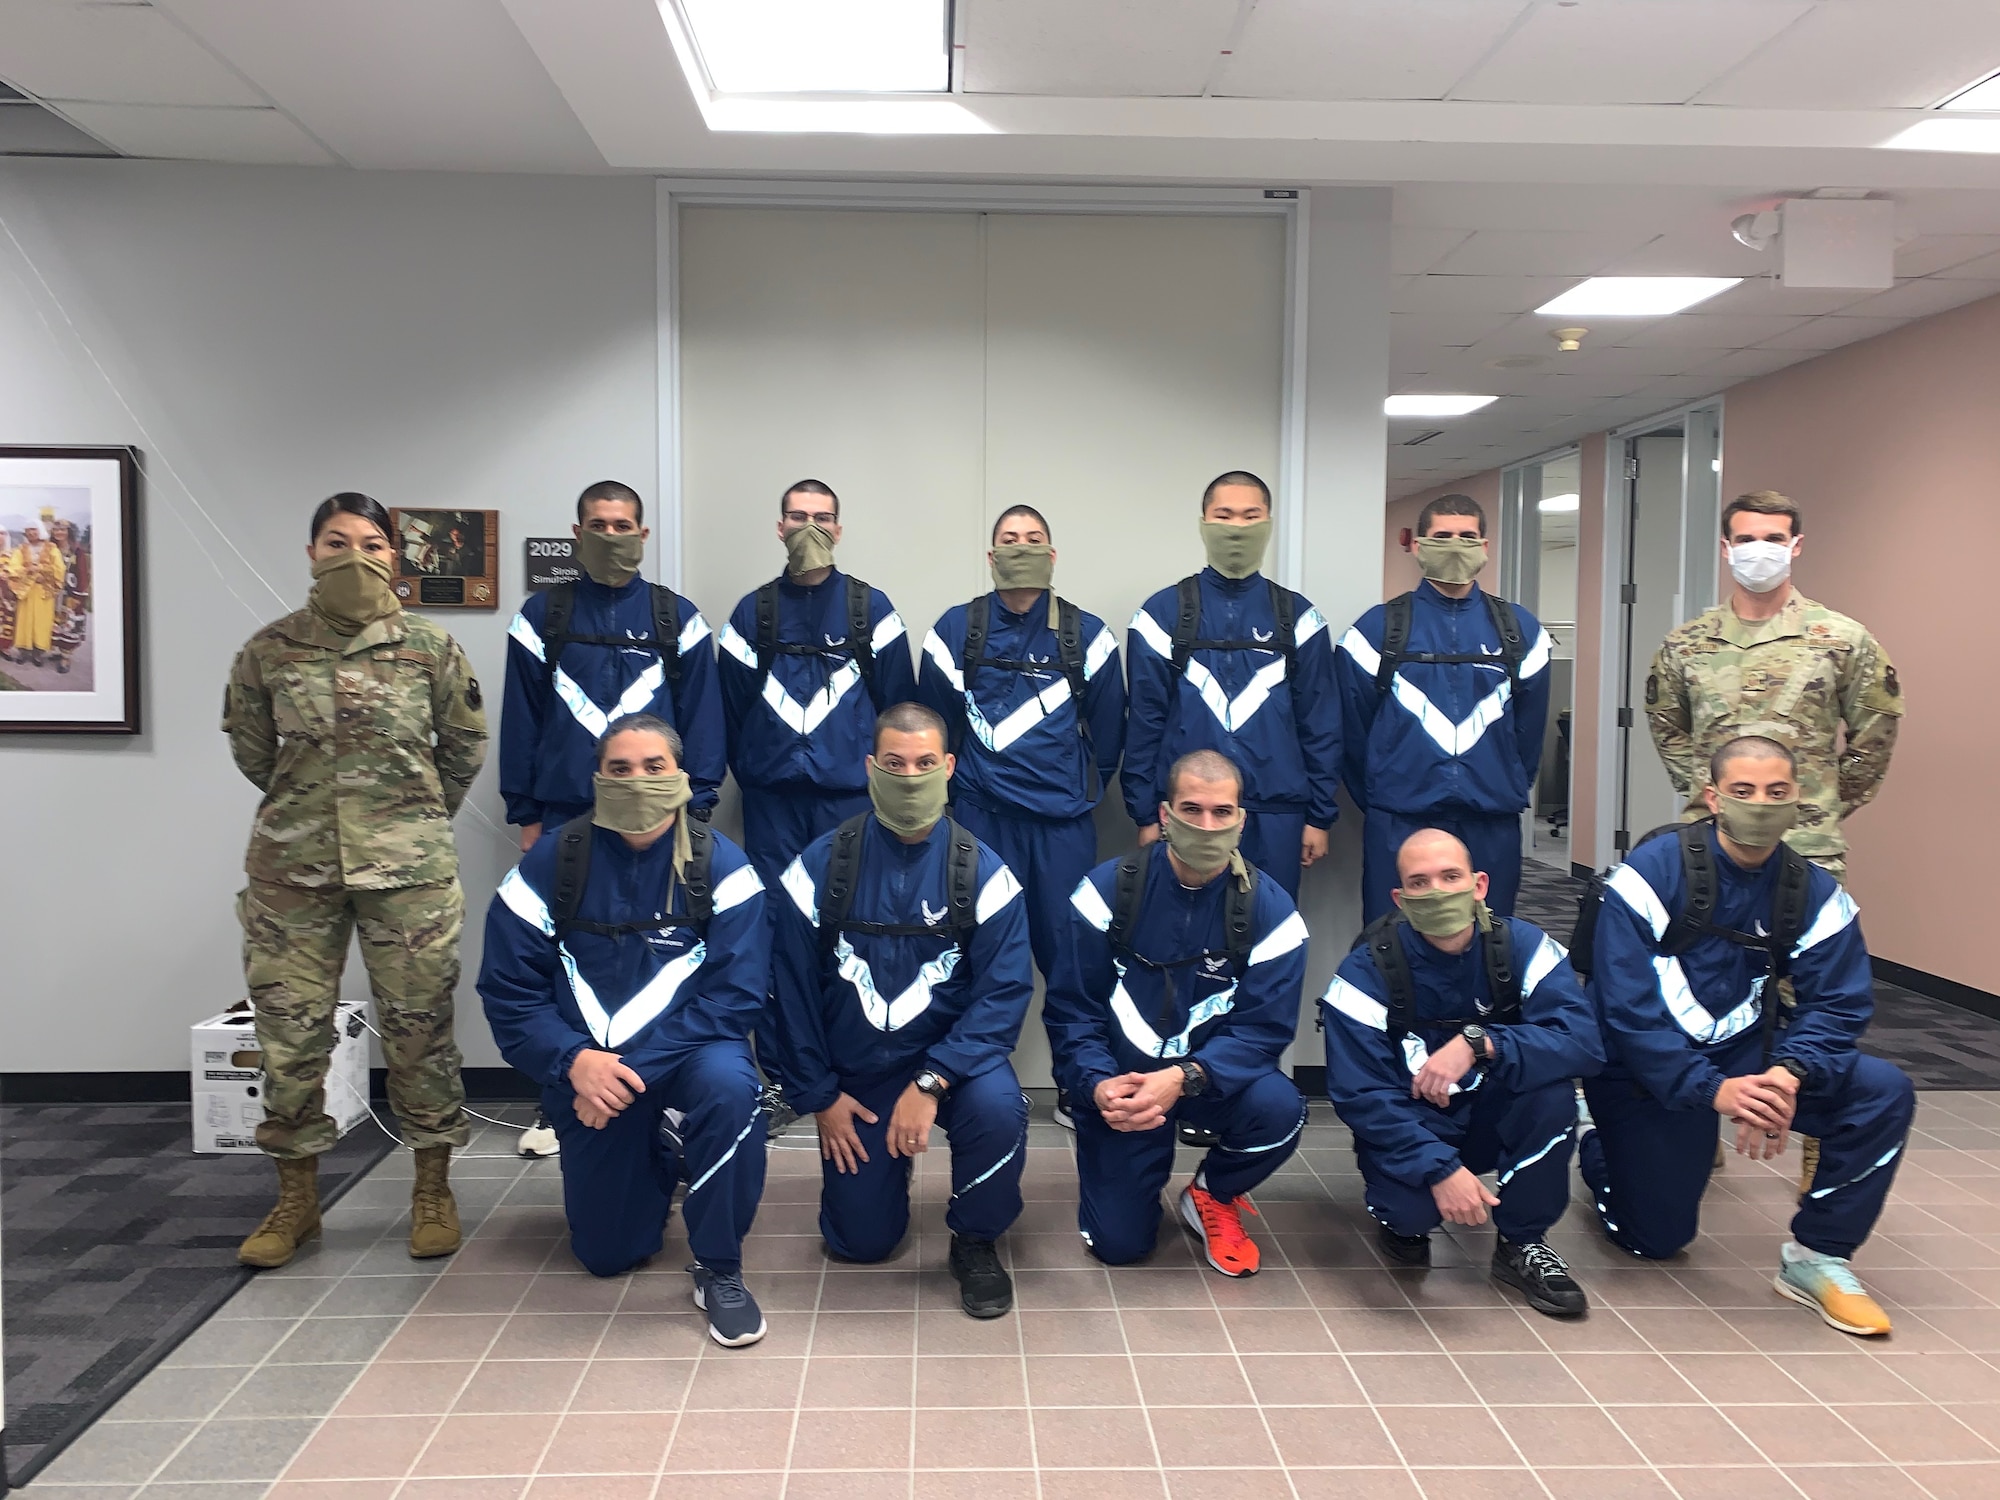 US Air Force Echo Flight trainees pose for a picture in the Commandant’s hallway. Due to COVID-19 precautions, they are wearing facemasks as required. They had to stop by campus for  their placement exam before returning to the 737 TRSS learning lab for their classroom distance learning.